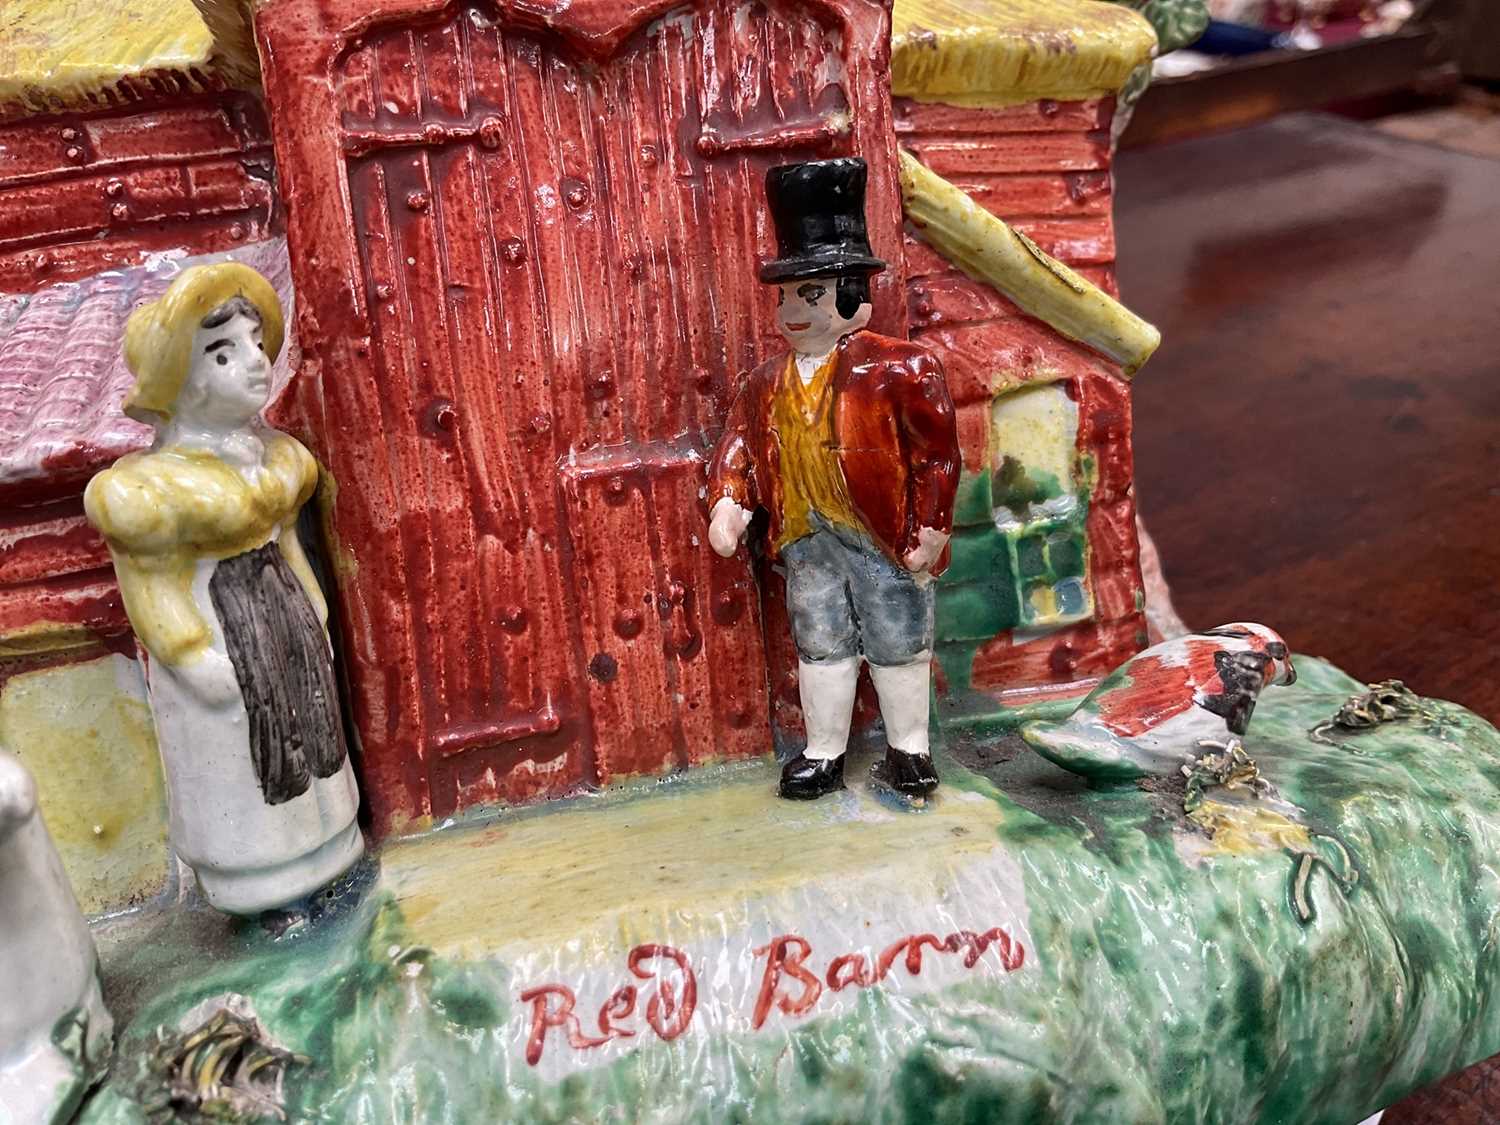 Extremely rare 19th century Staffordshire model of the Red Barn at Polstead - Image 5 of 9